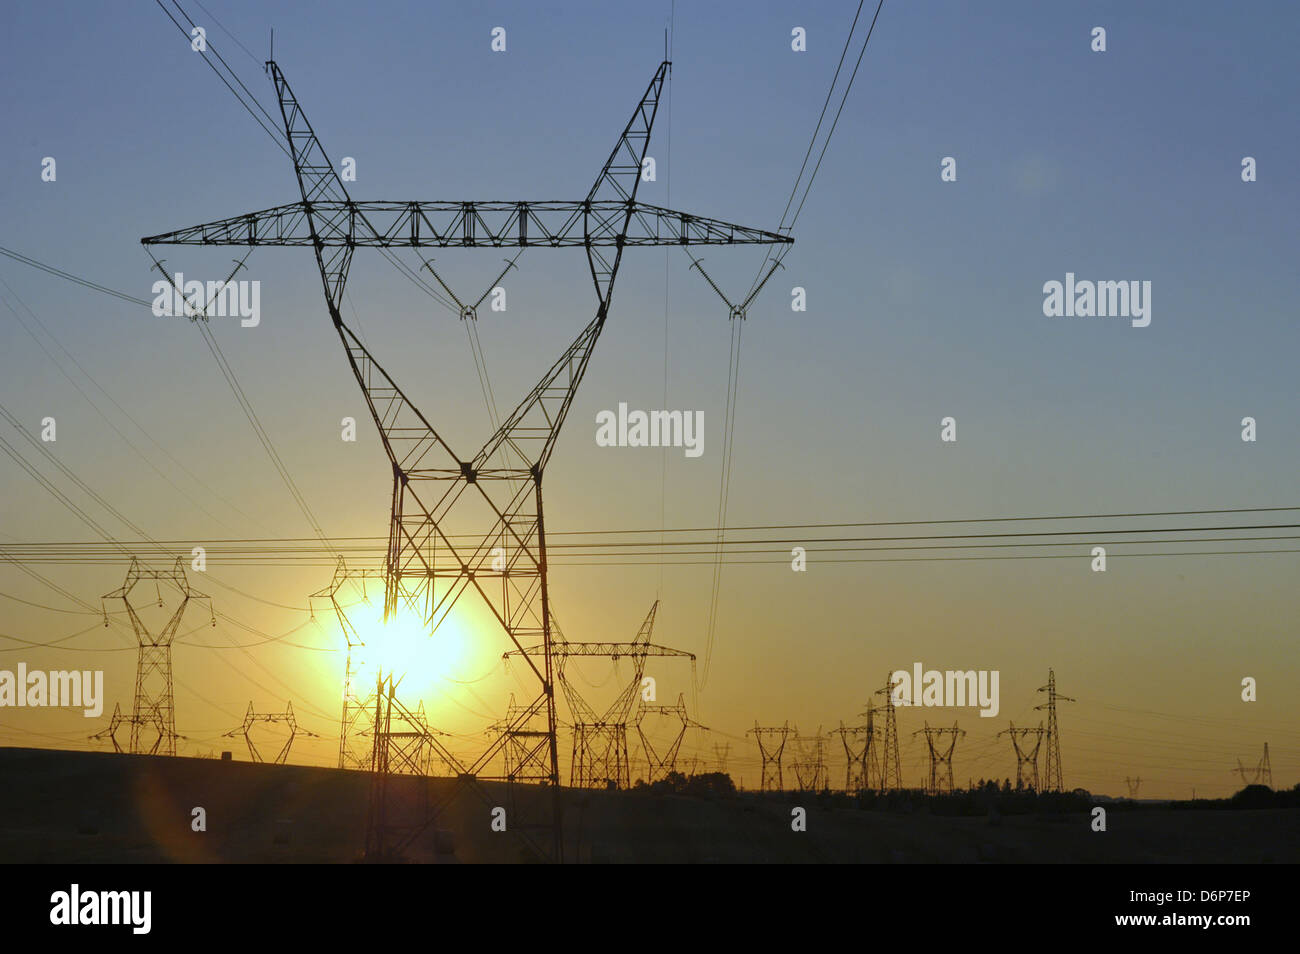 France, Burgundy, high voltage lines, Sunset peaceful, harmonious, high voltage pylons on the field, power lines, transmission Stock Photo